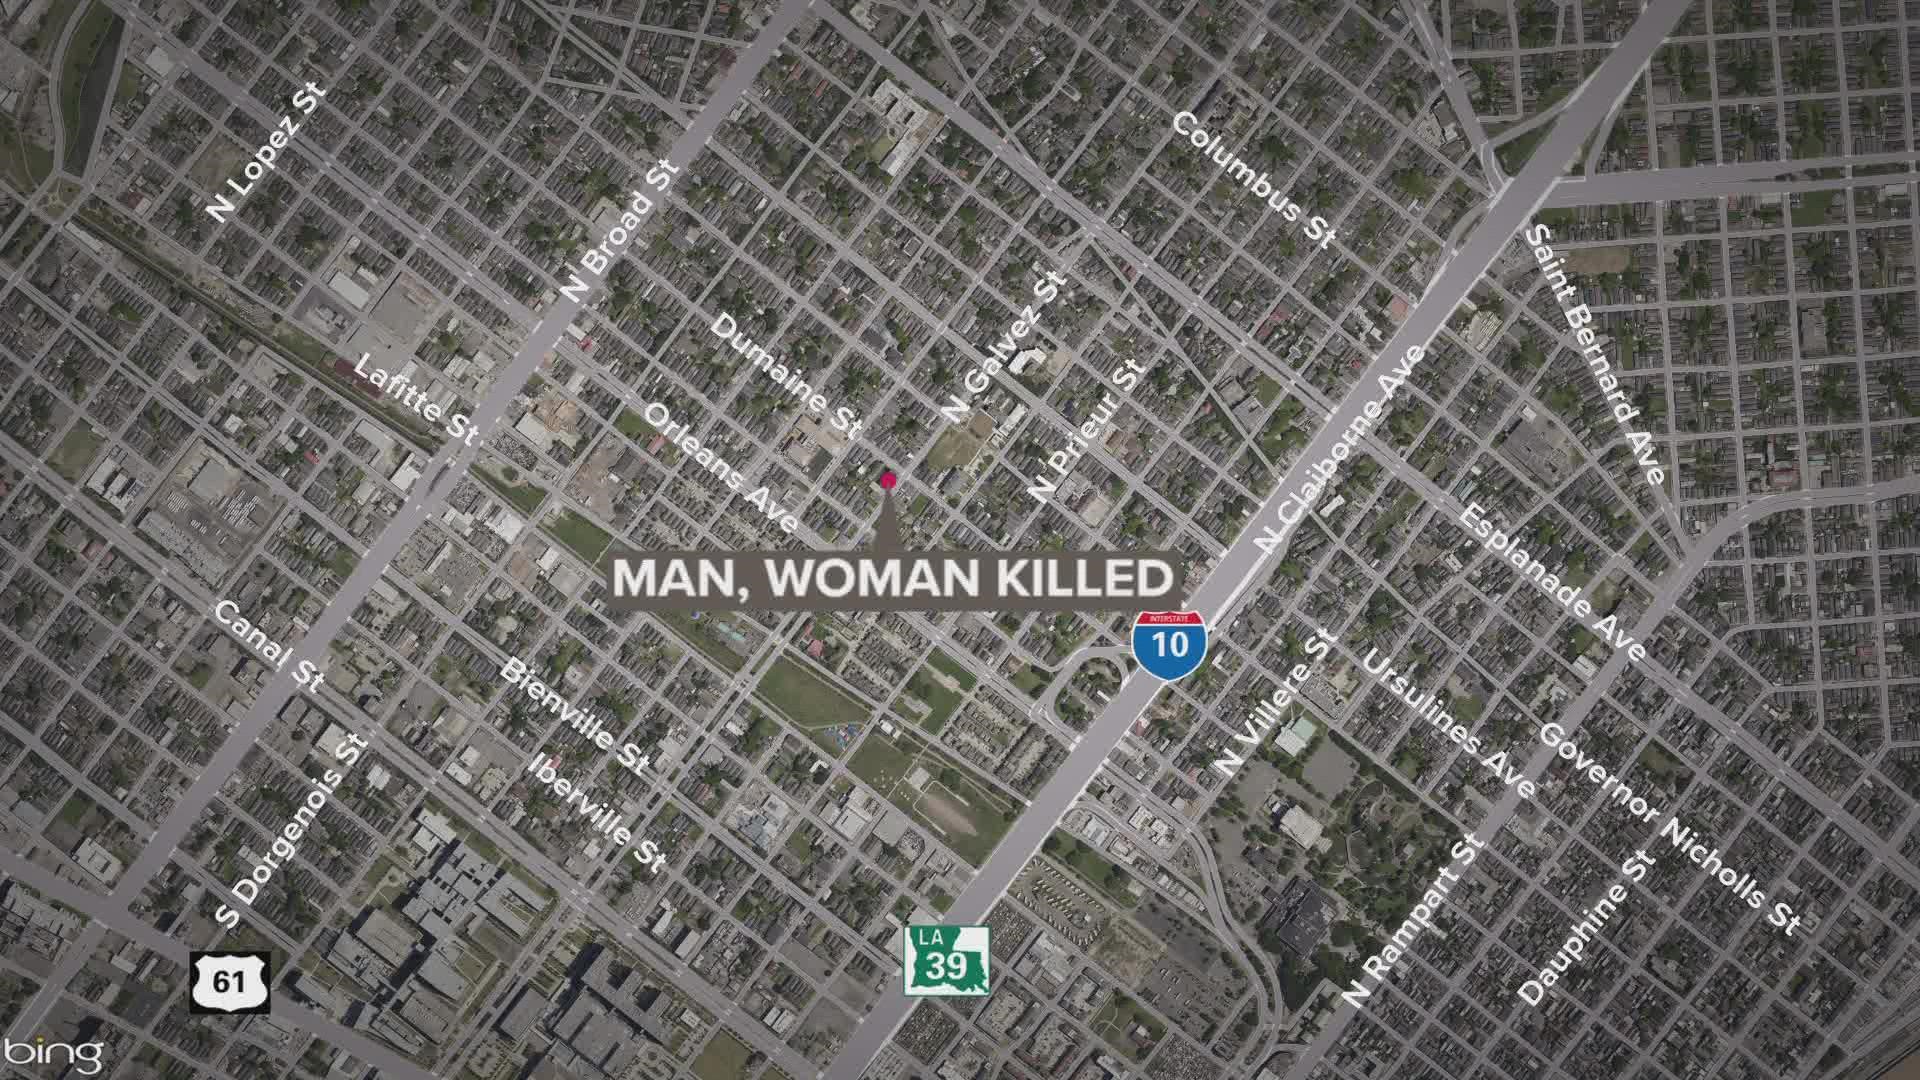 A man and a woman were both found shot to death after a wellness check at the residence.